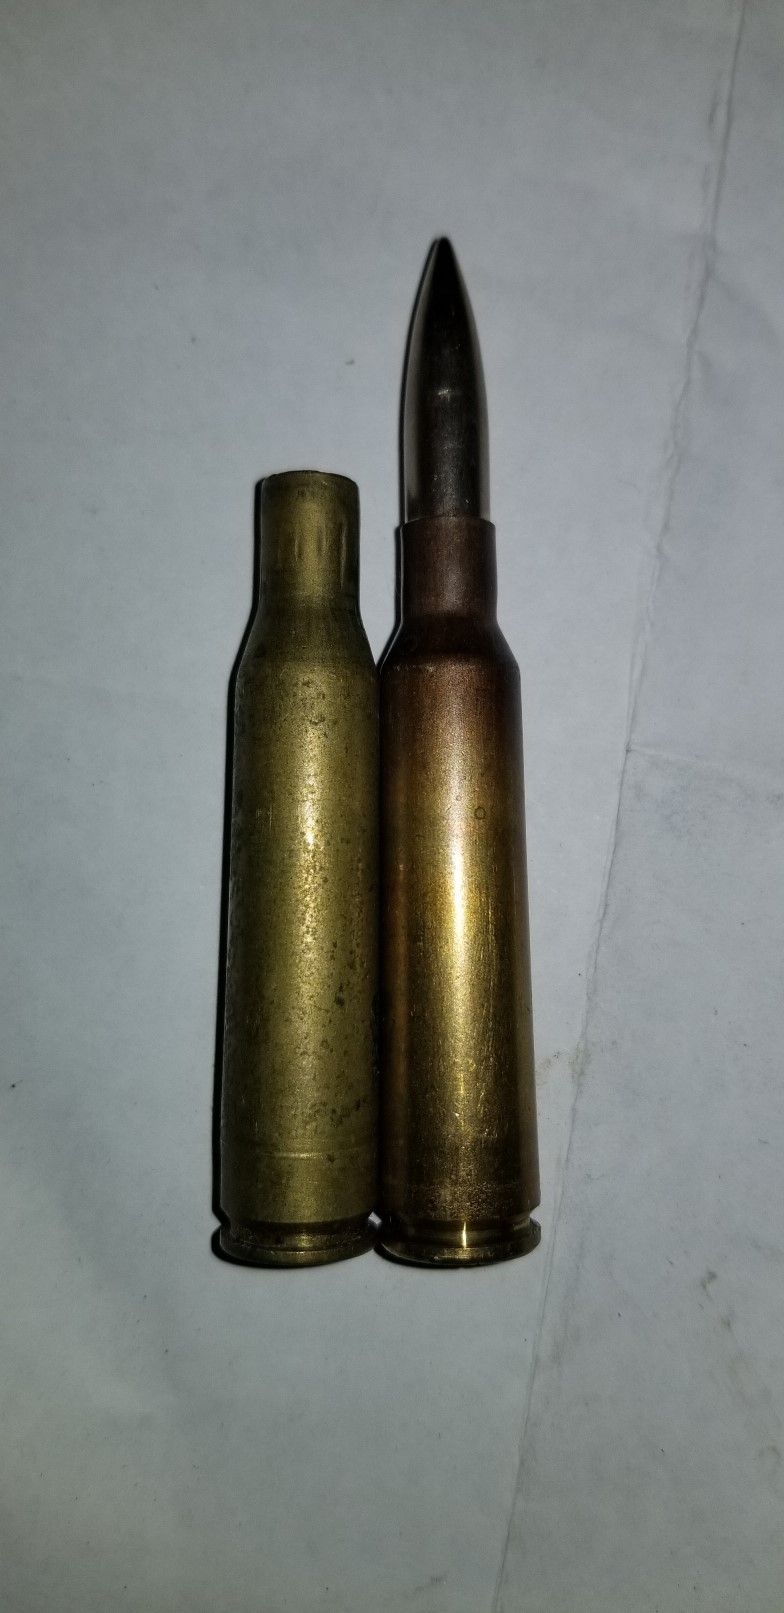 6.5x58mm and 6.5x55mm.jpg